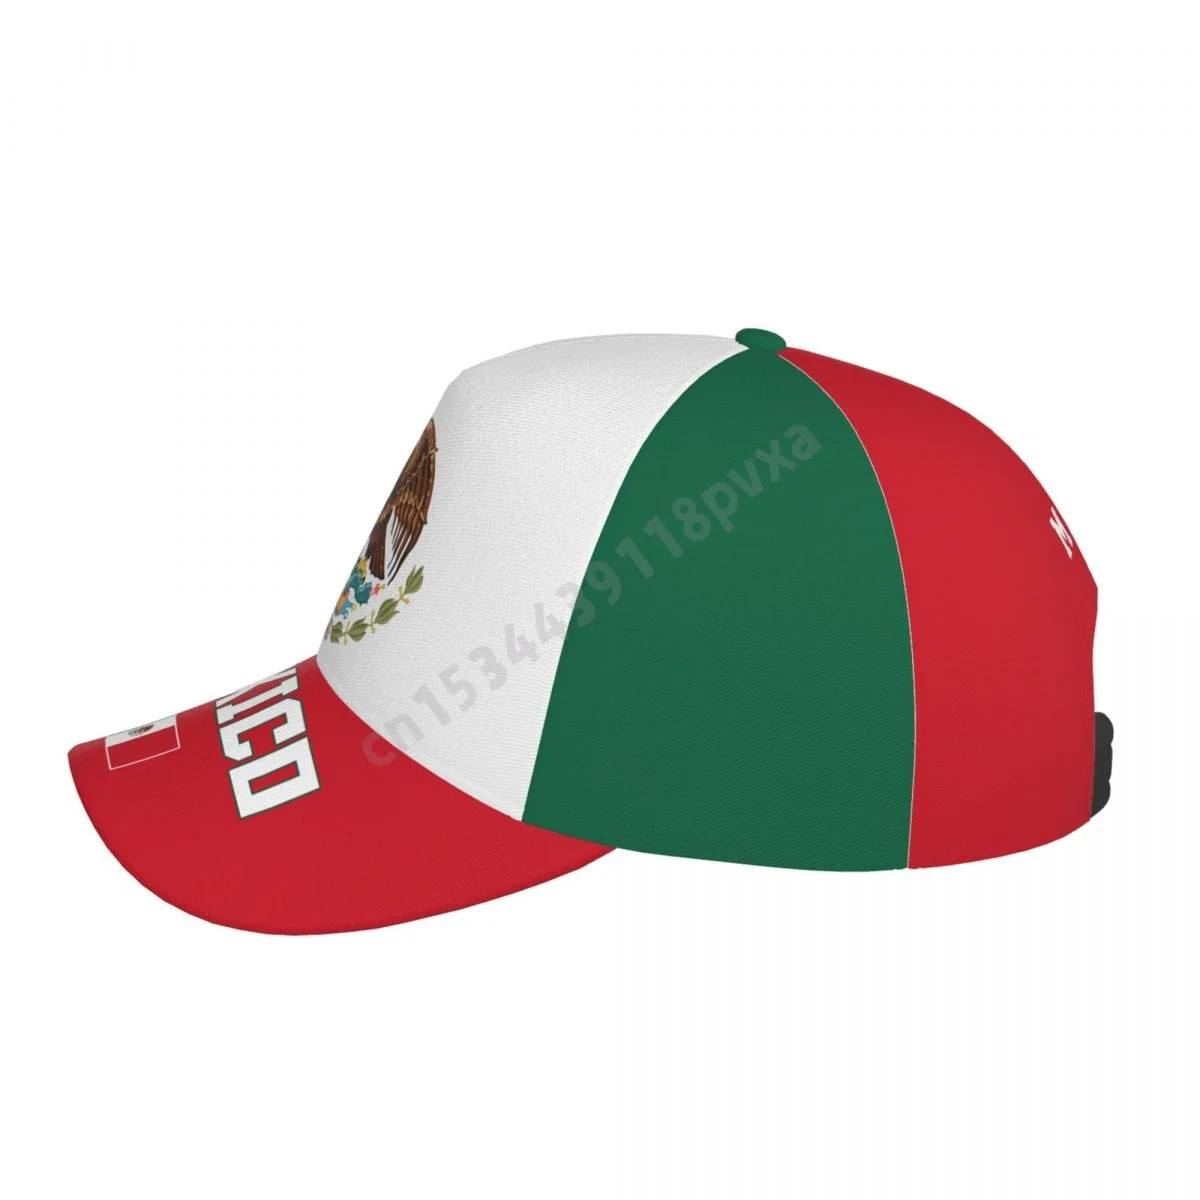 Mexico Nation Baseball Team Adult Green/red Adjustable Hat Cap 